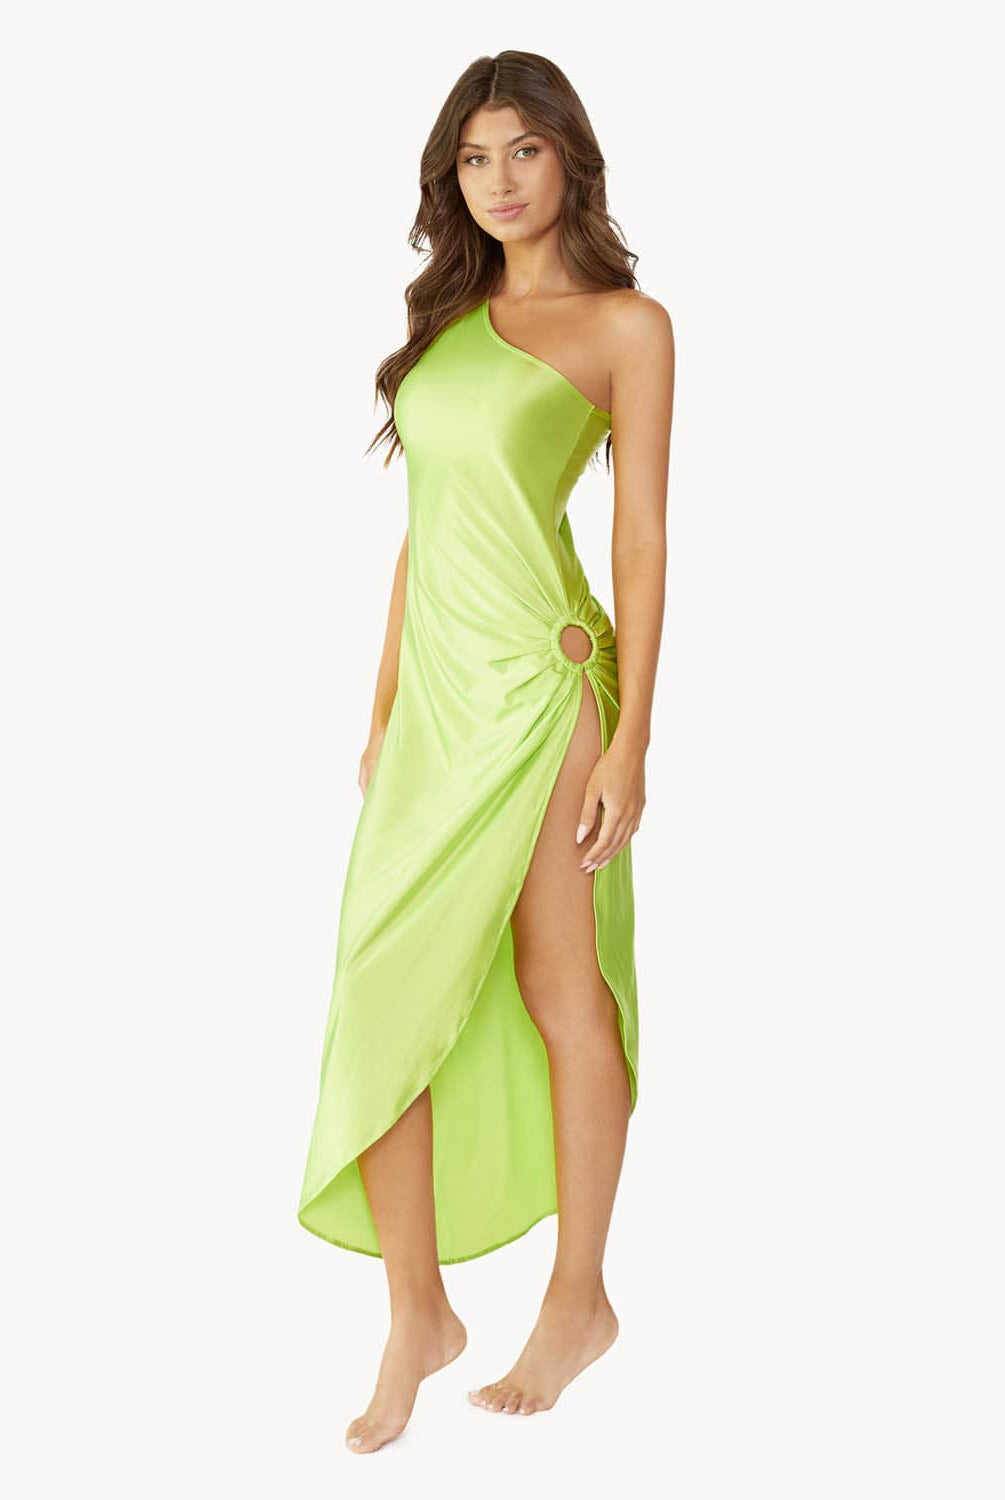 Brunette woman wearing a lime green one-shoulder dress with side slit and ring detail stands in front of white wall.